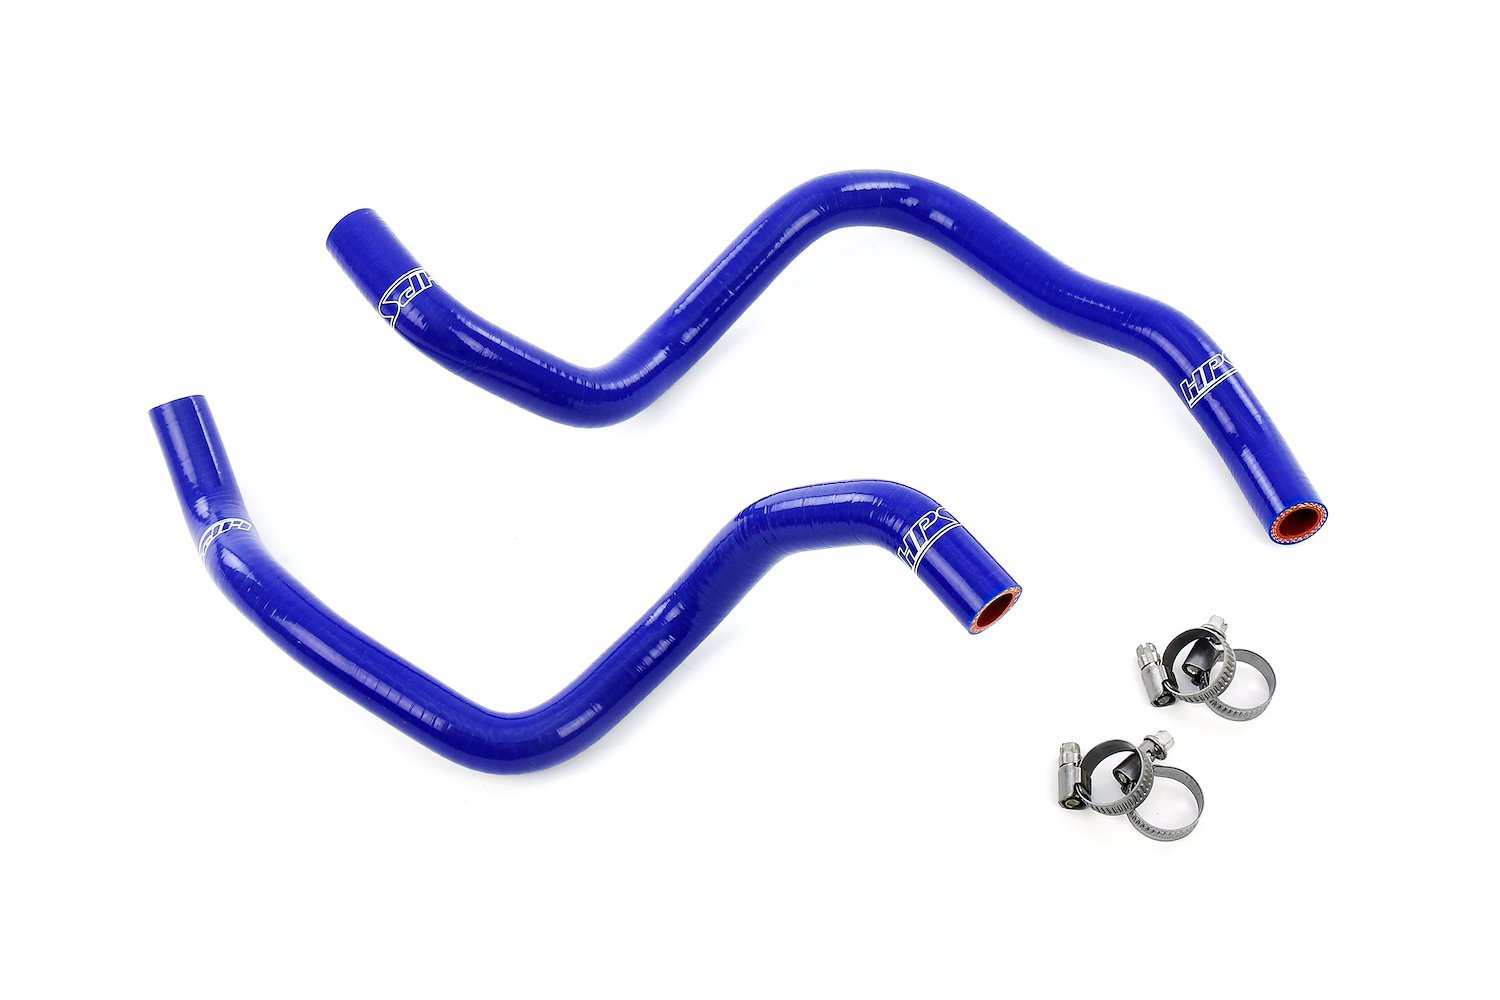 57-2108-BLUE Heater Hose Kit, 3-Ply Reinforced Silicone, Replaces Rubber Heater Coolant Hoses